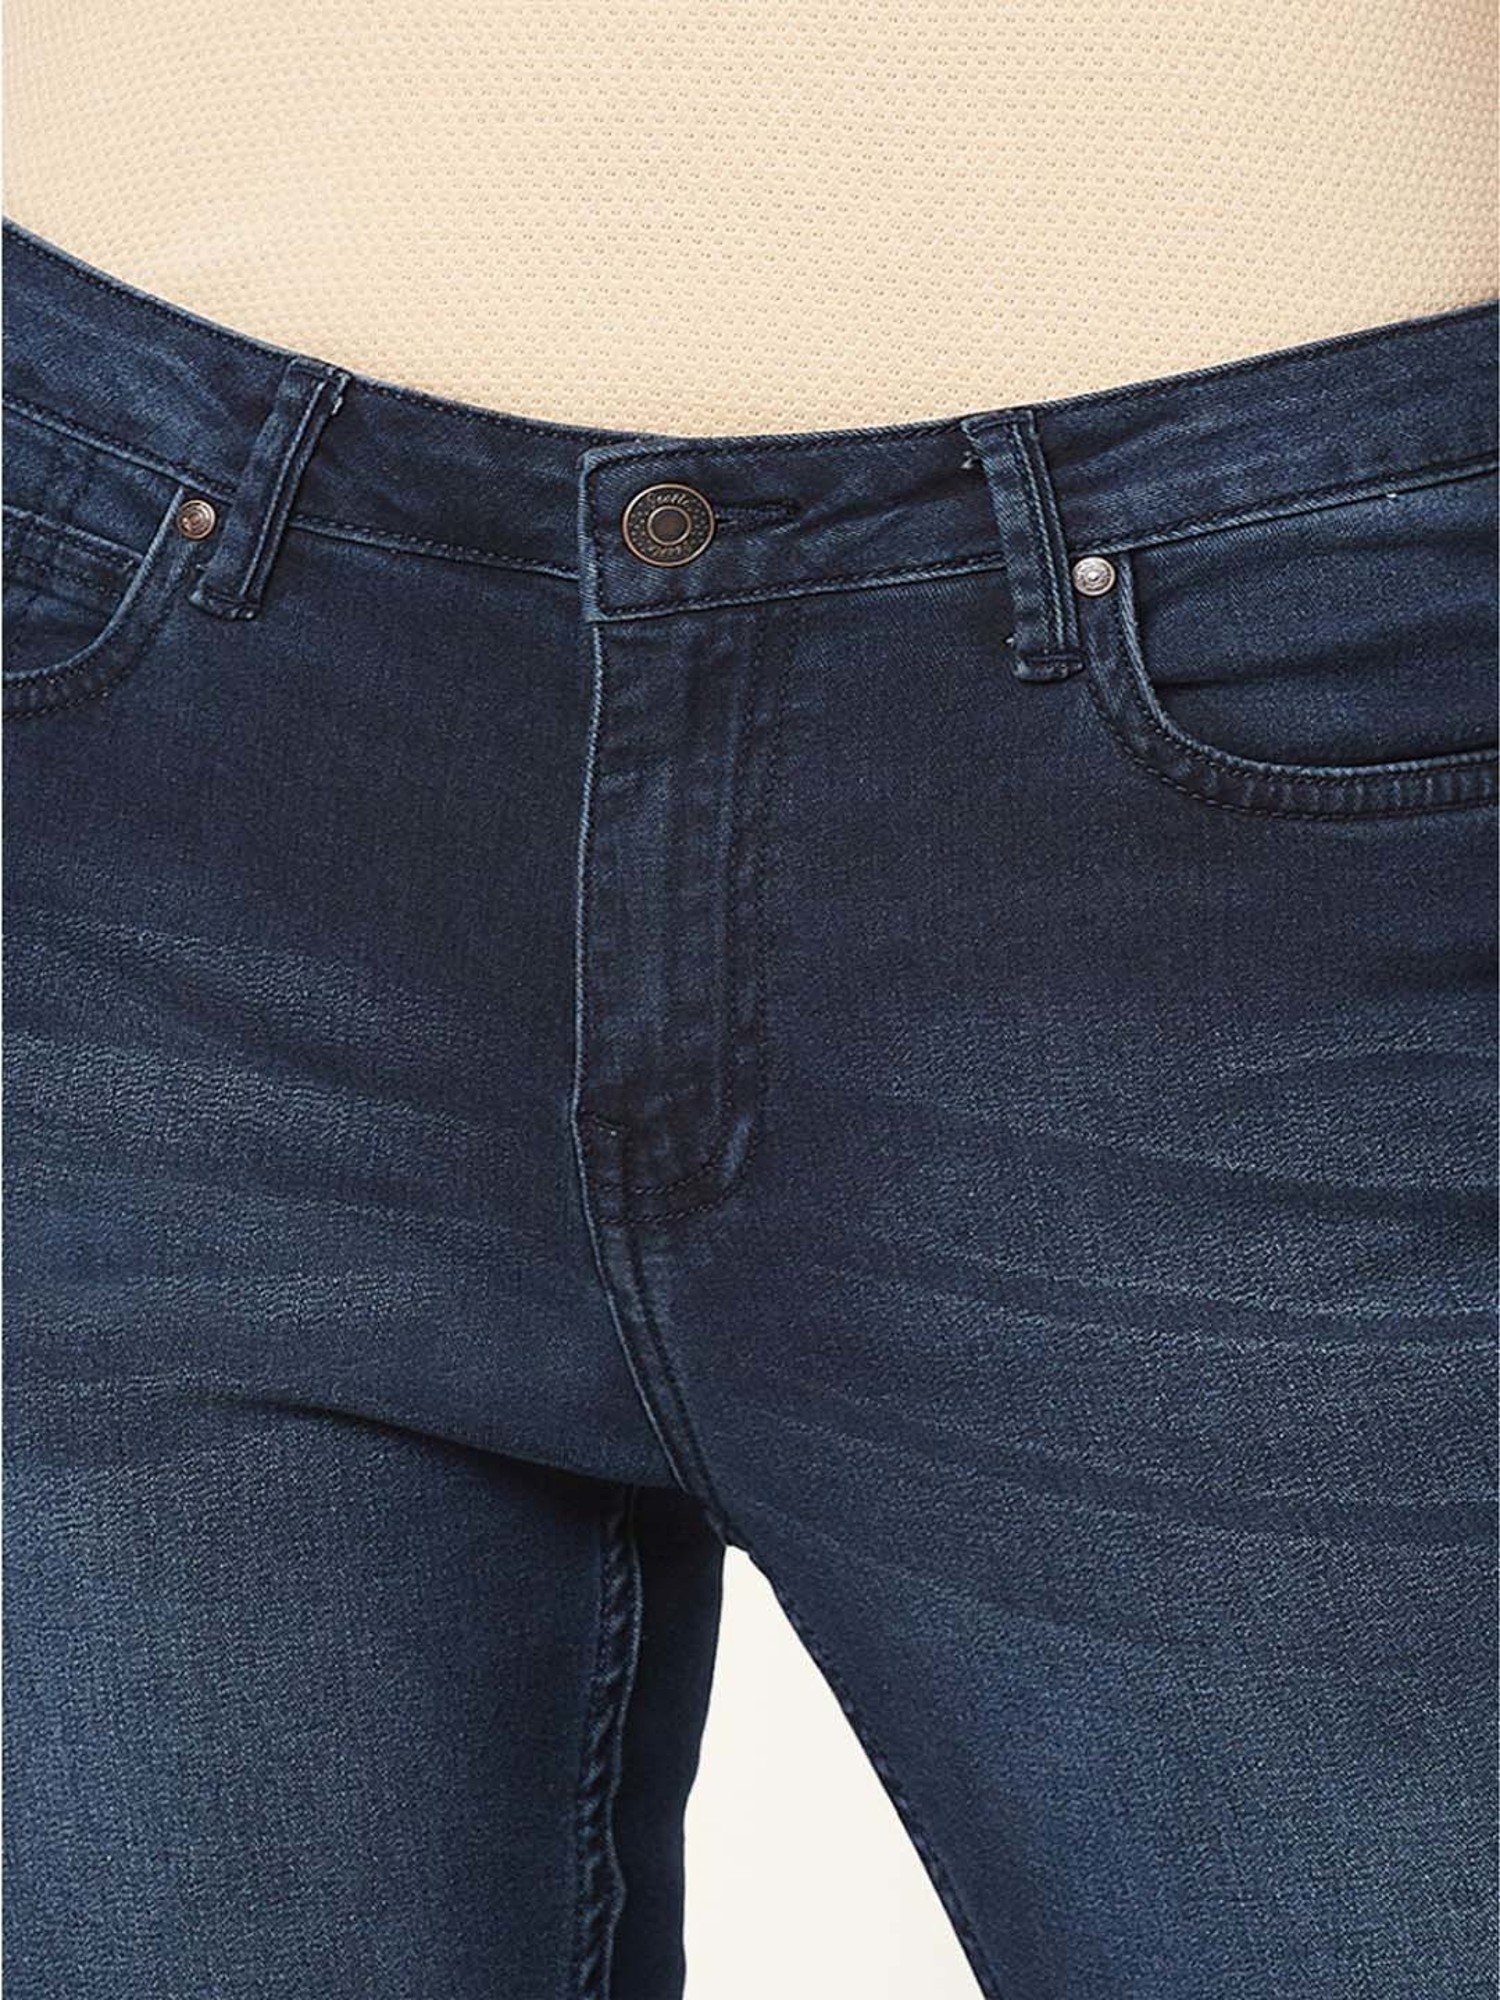 Womens Slim fir Jeans in Delhi at best price by Pantaloons (Unity One Mall)  - Justdial